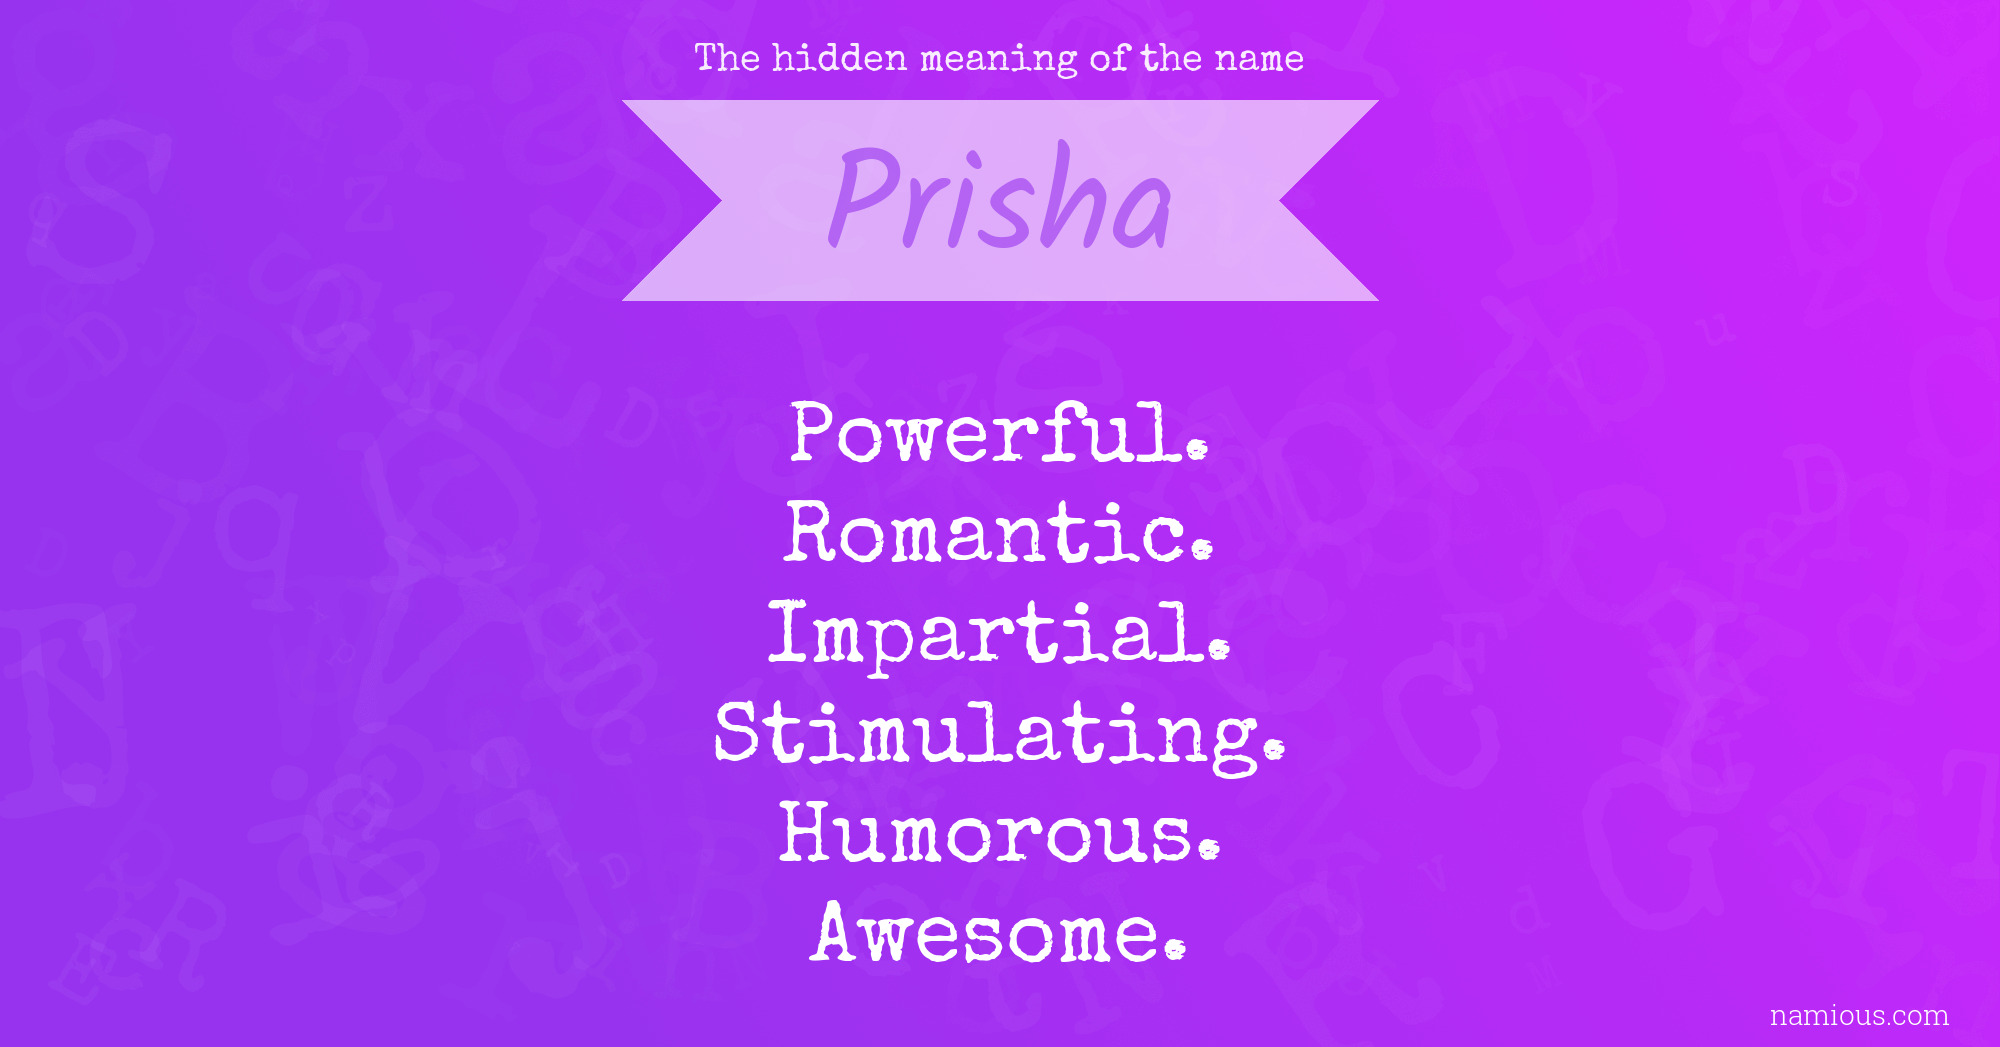 The hidden meaning of the name Prisha